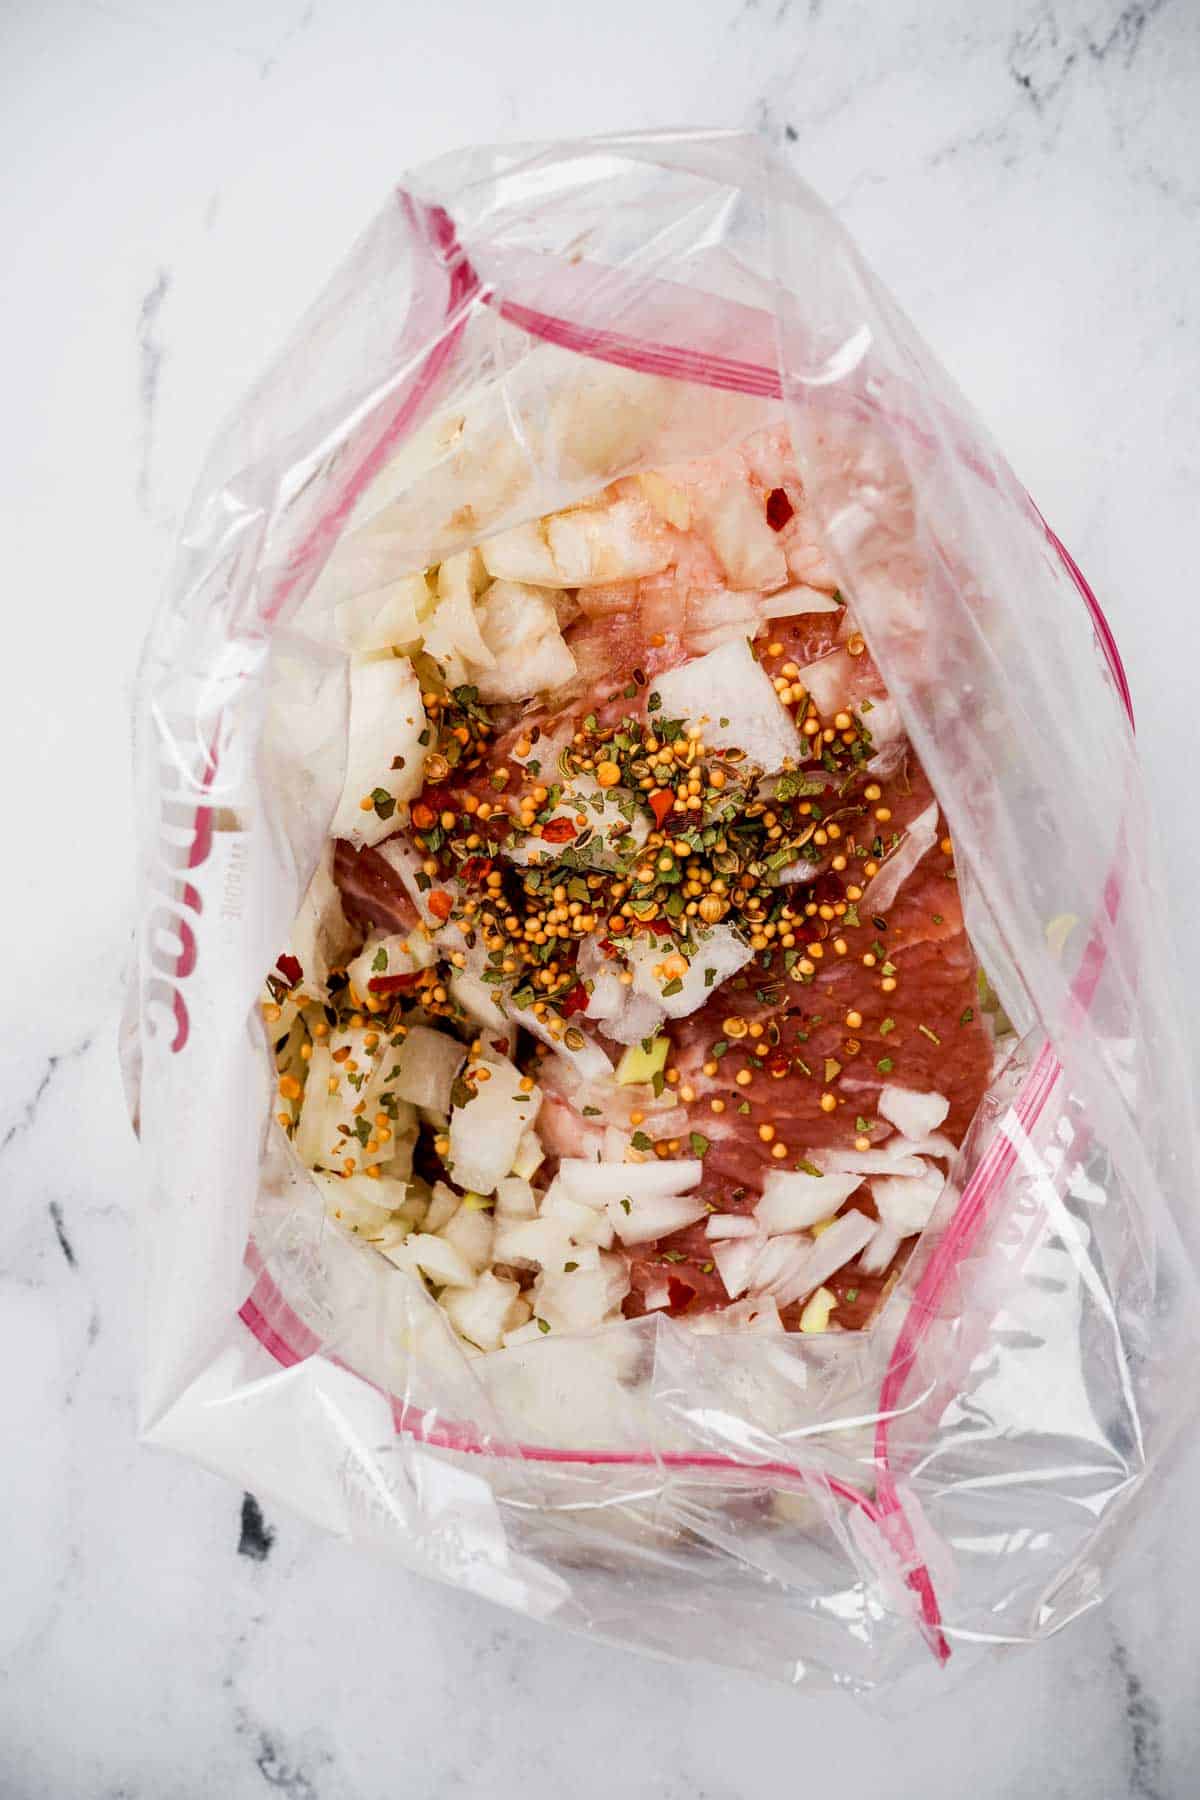 https://www.wenthere8this.com/wp-content/uploads/2023/03/sous-vide-corned-beef-4.jpg